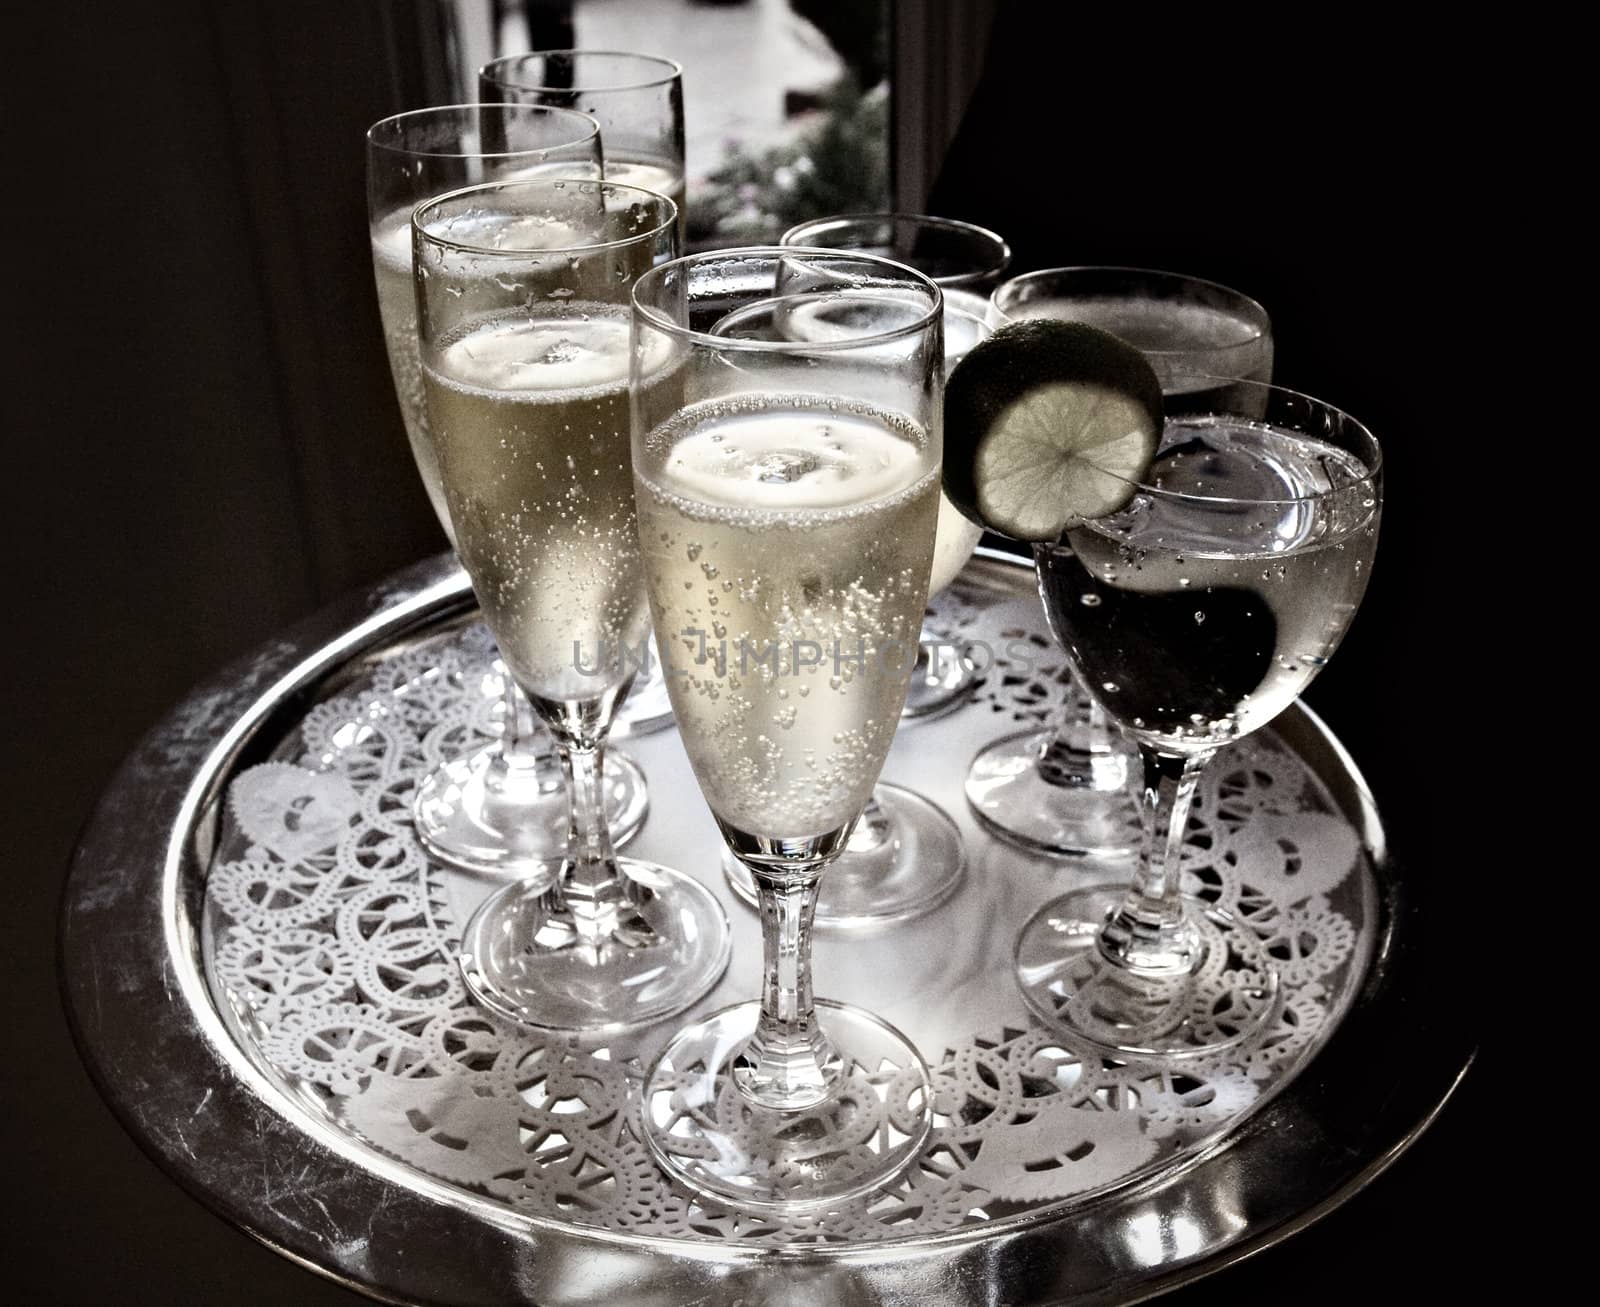 A waiter serves sparkling wine and water on a silver tray